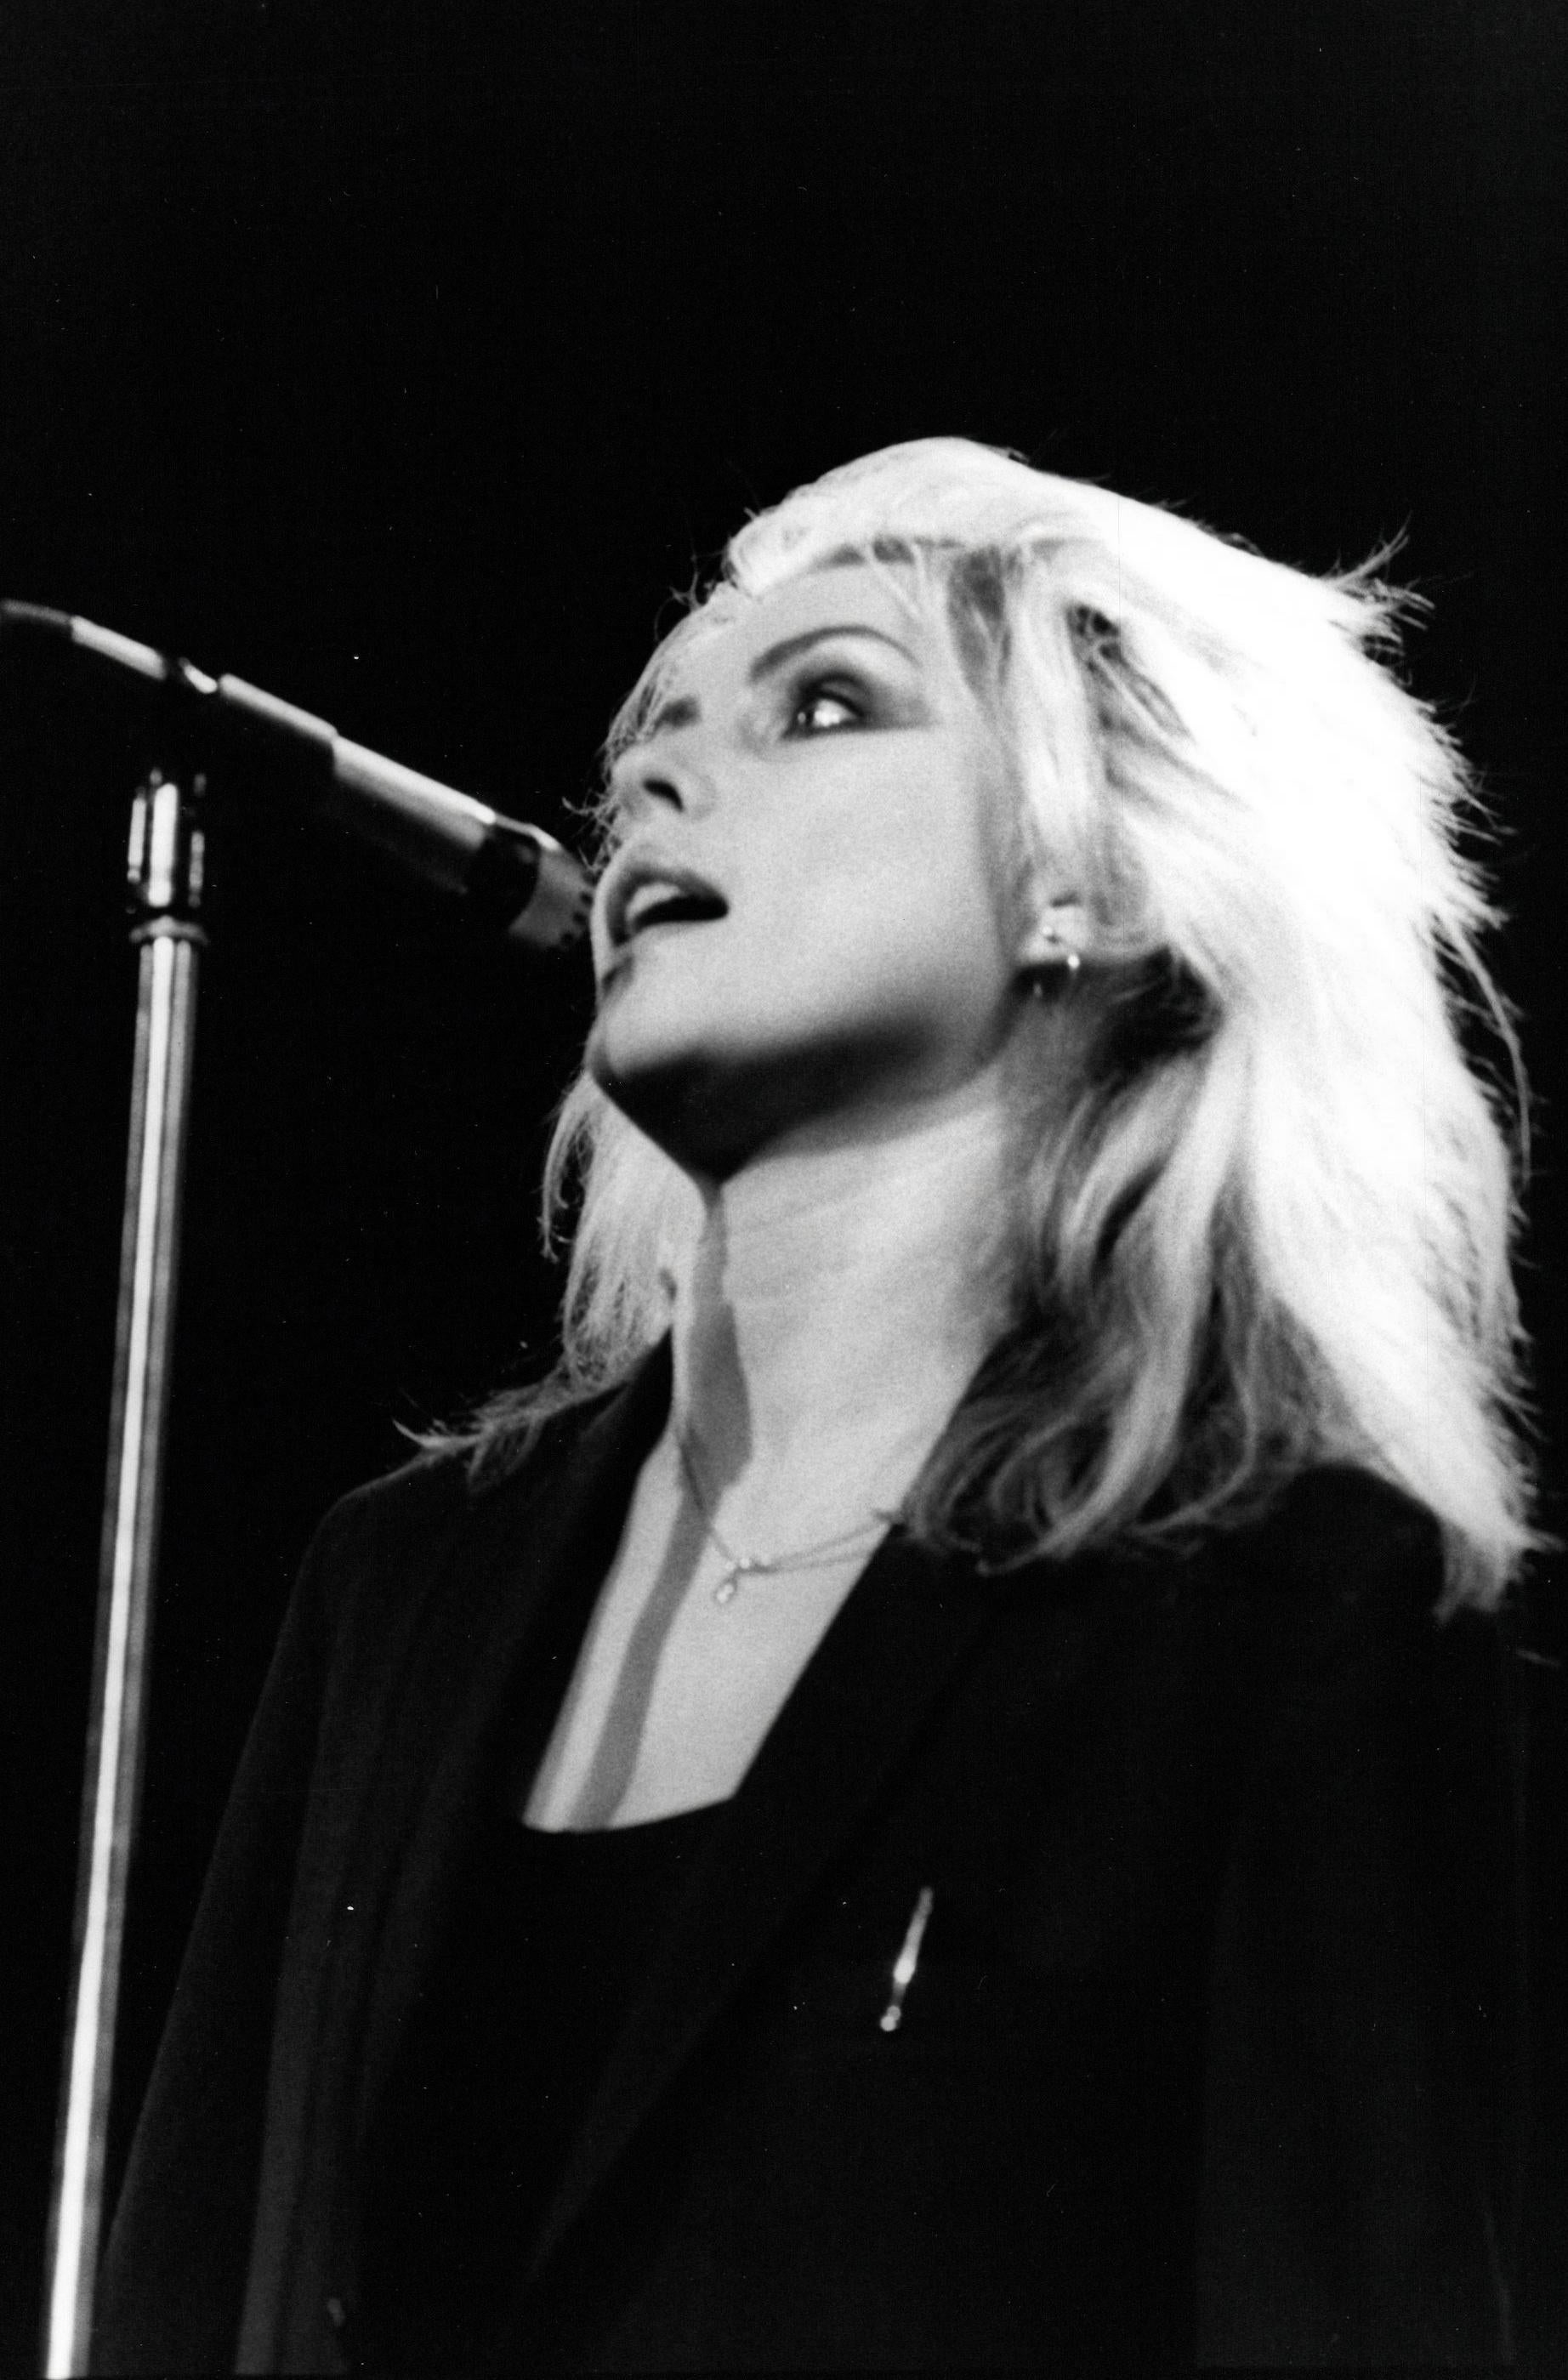 Paul Cox Black and White Photograph - Debbie Harry of Blondie Singing to Audience Vintage Original Photograph